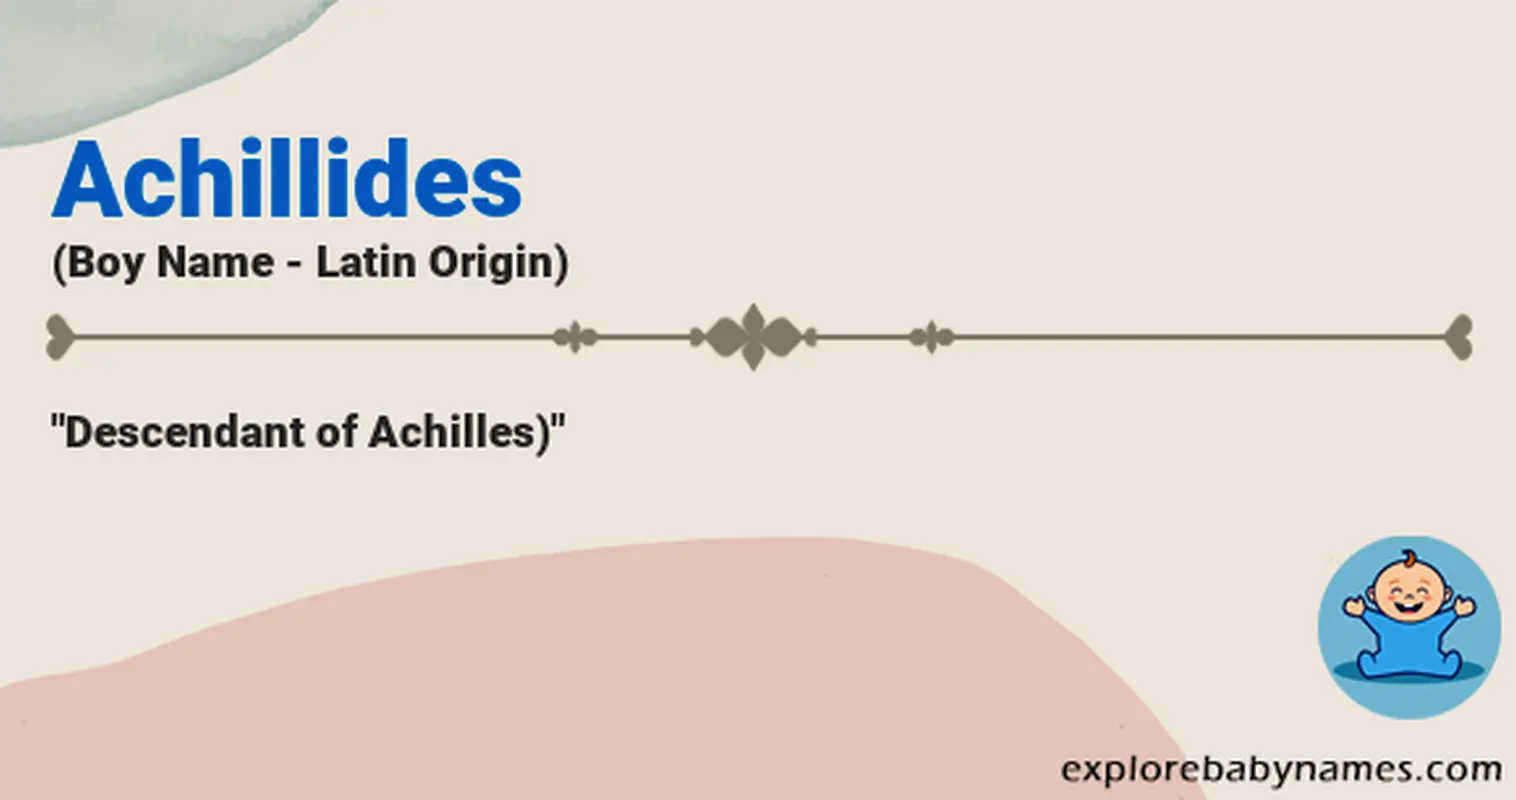 Meaning of Achillides